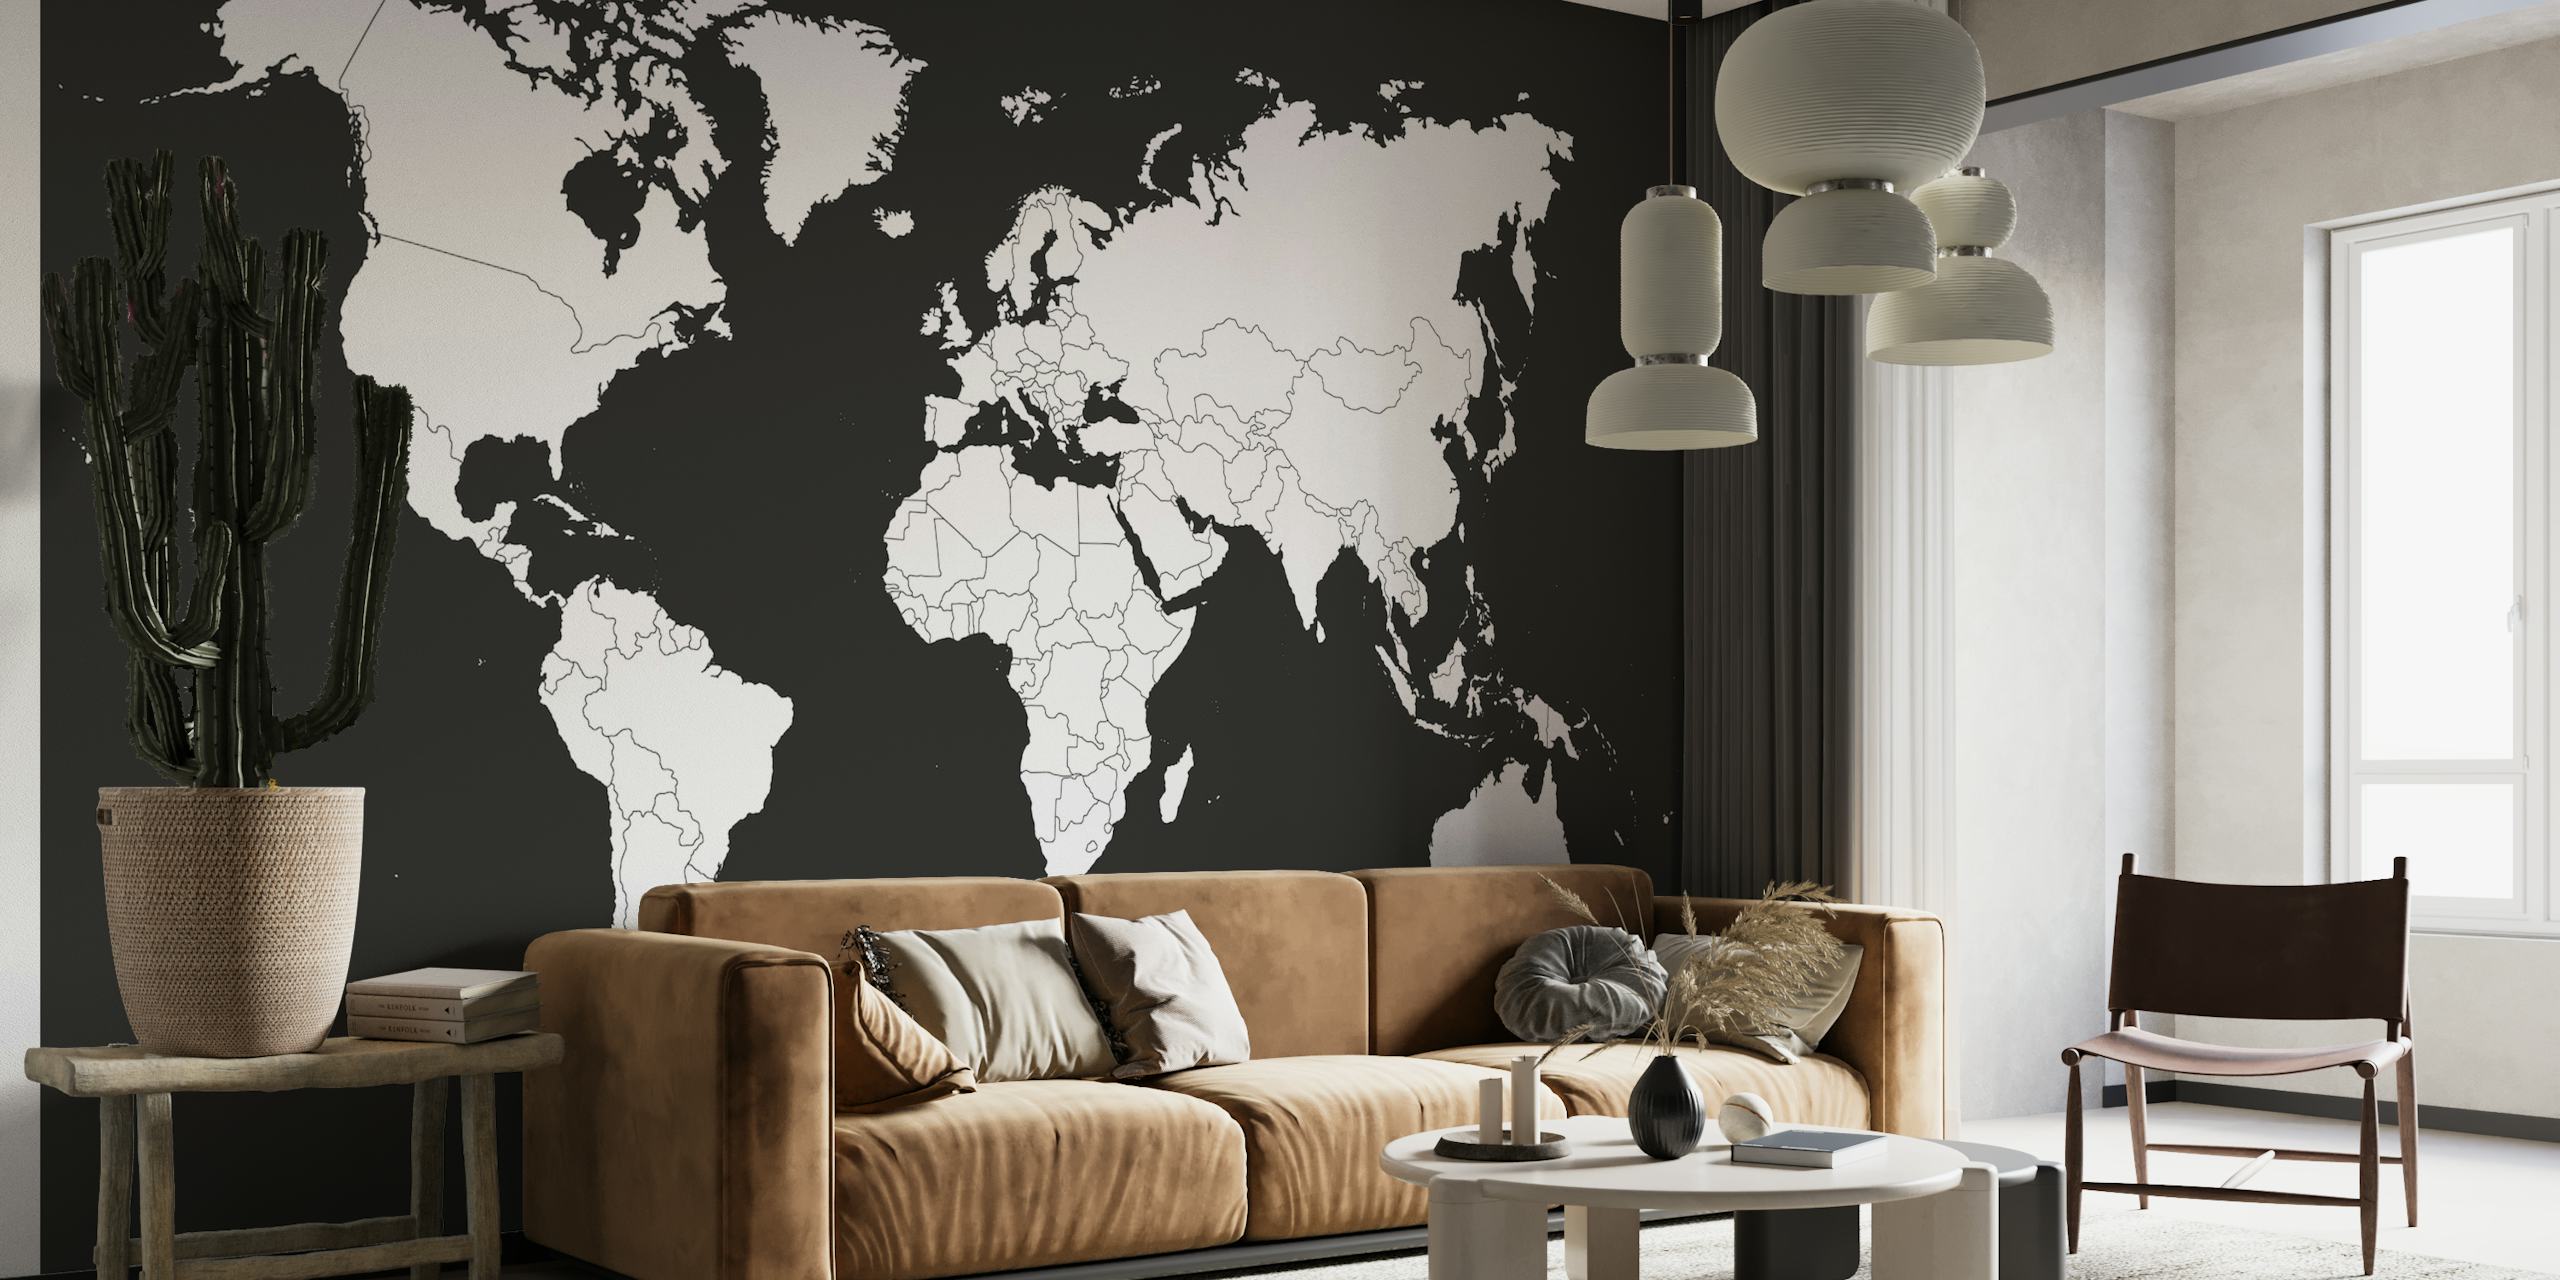 Black White World Map Outlined papel pintado